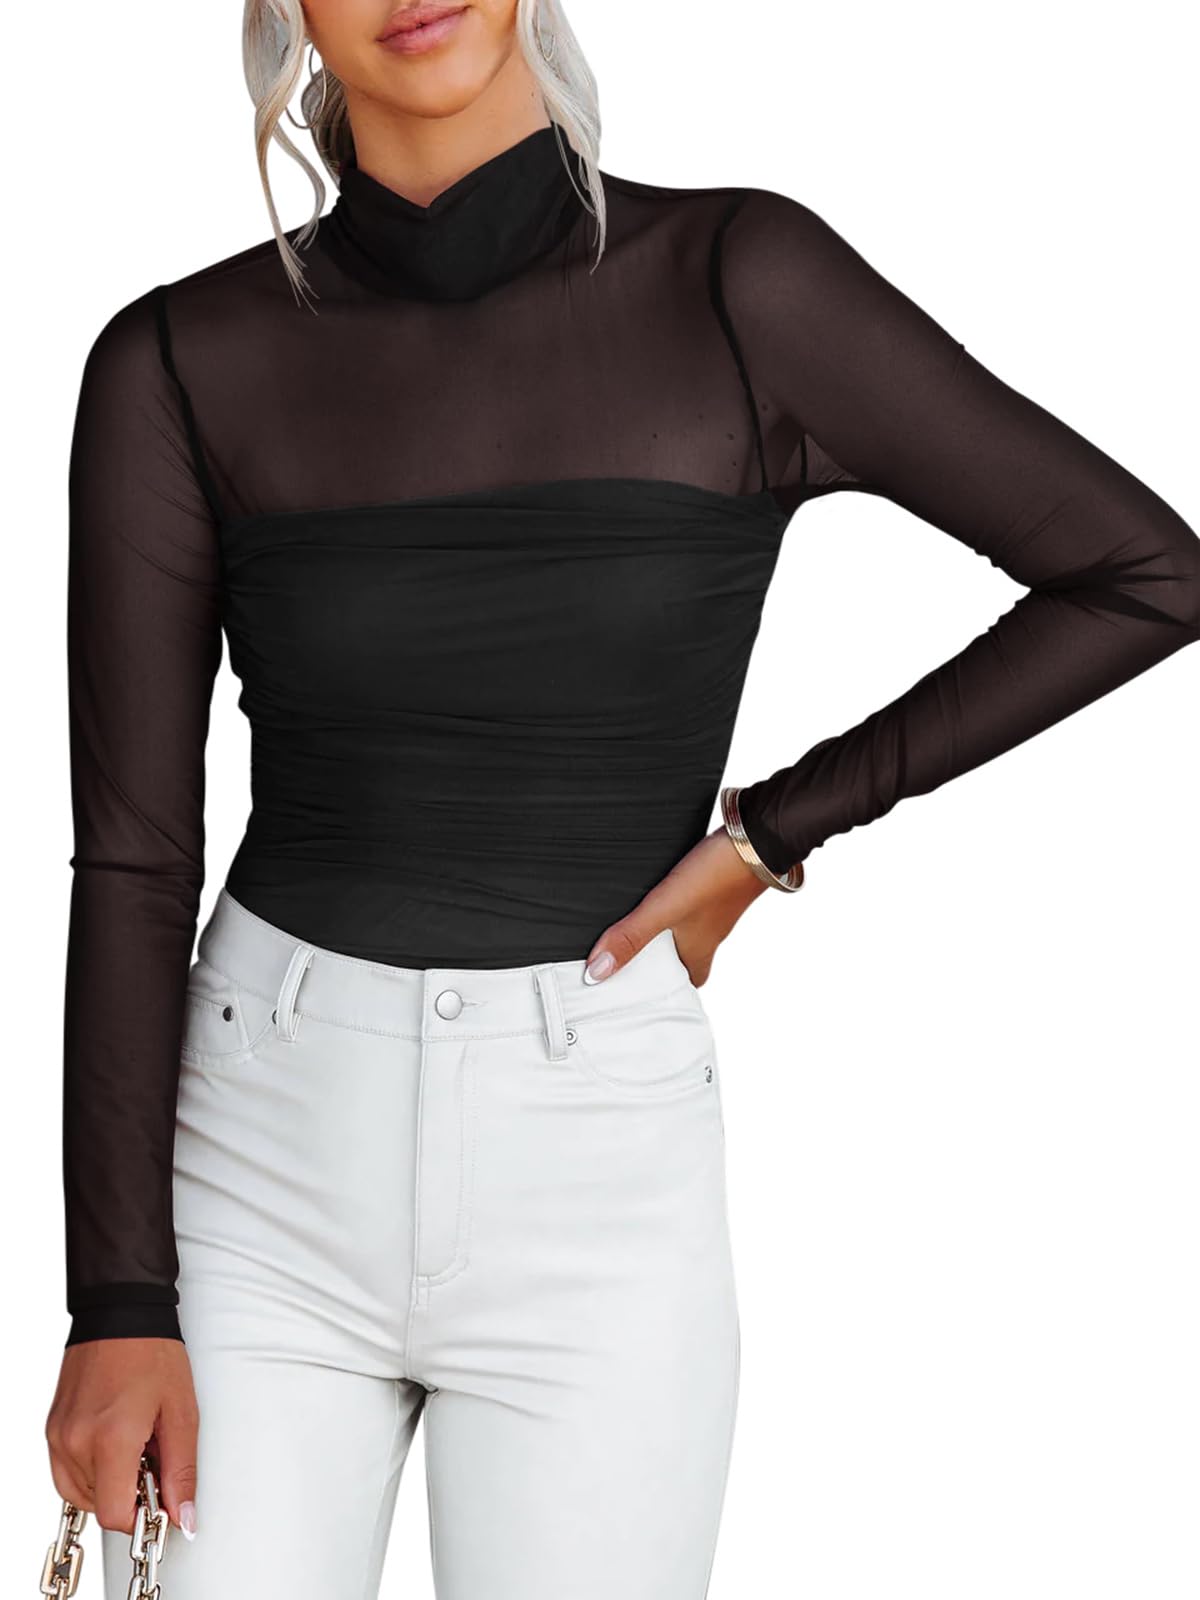 REORIA Women’s Sexy Mock Turtle Neck Long Sleeve Sheer Mesh Ruched Going Out Bodysuits Tops